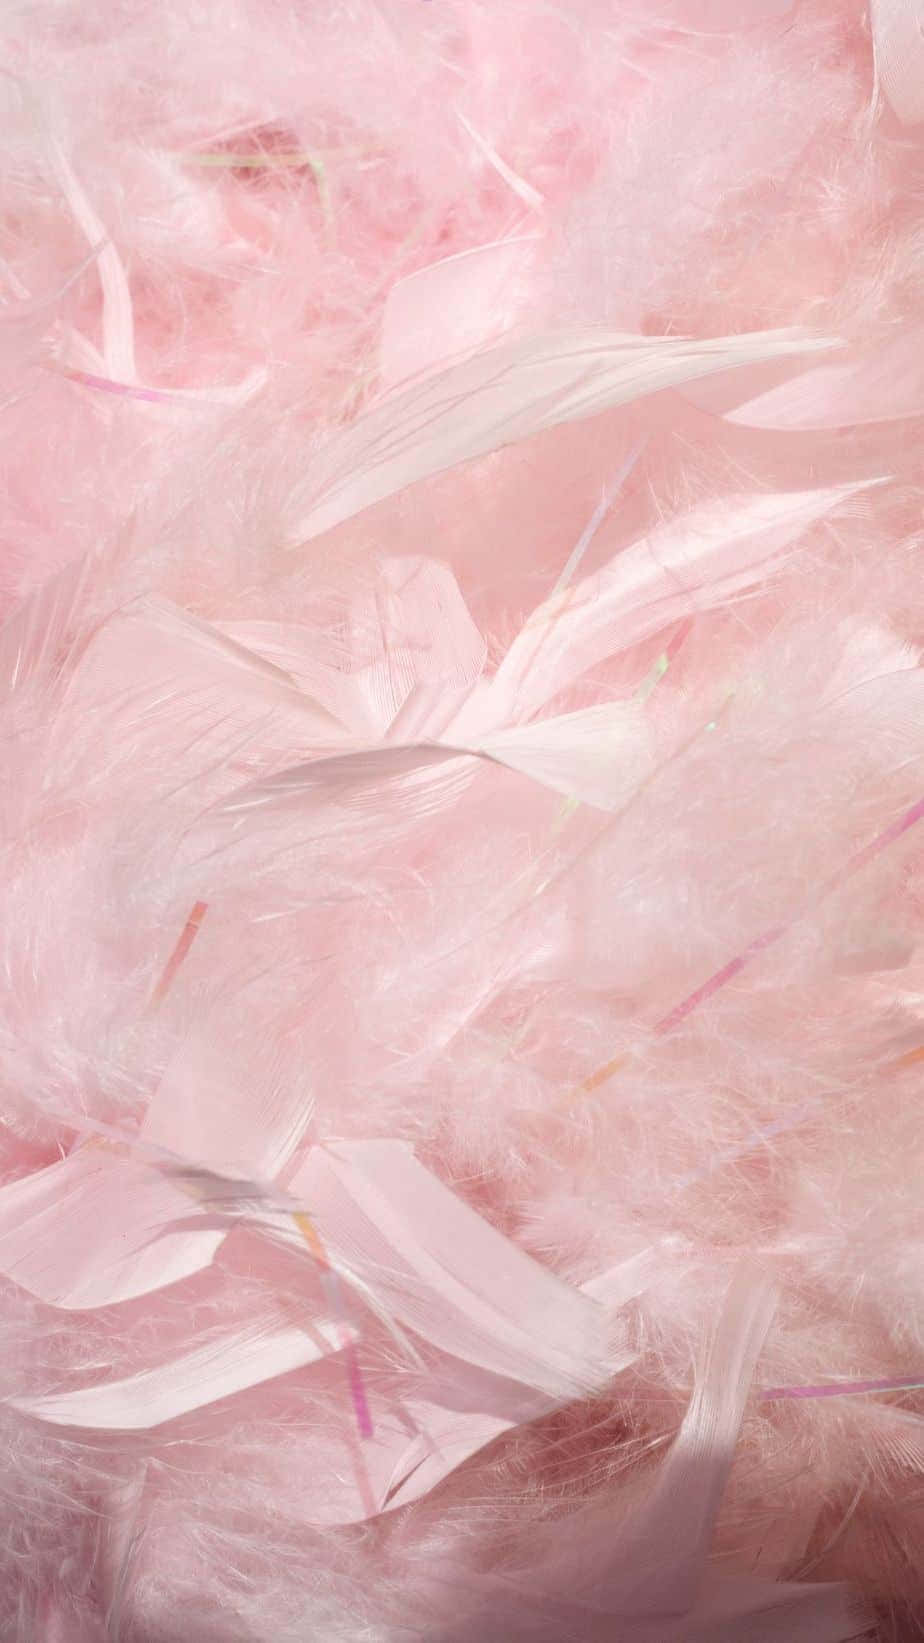 Pink Feathers iPhone Background